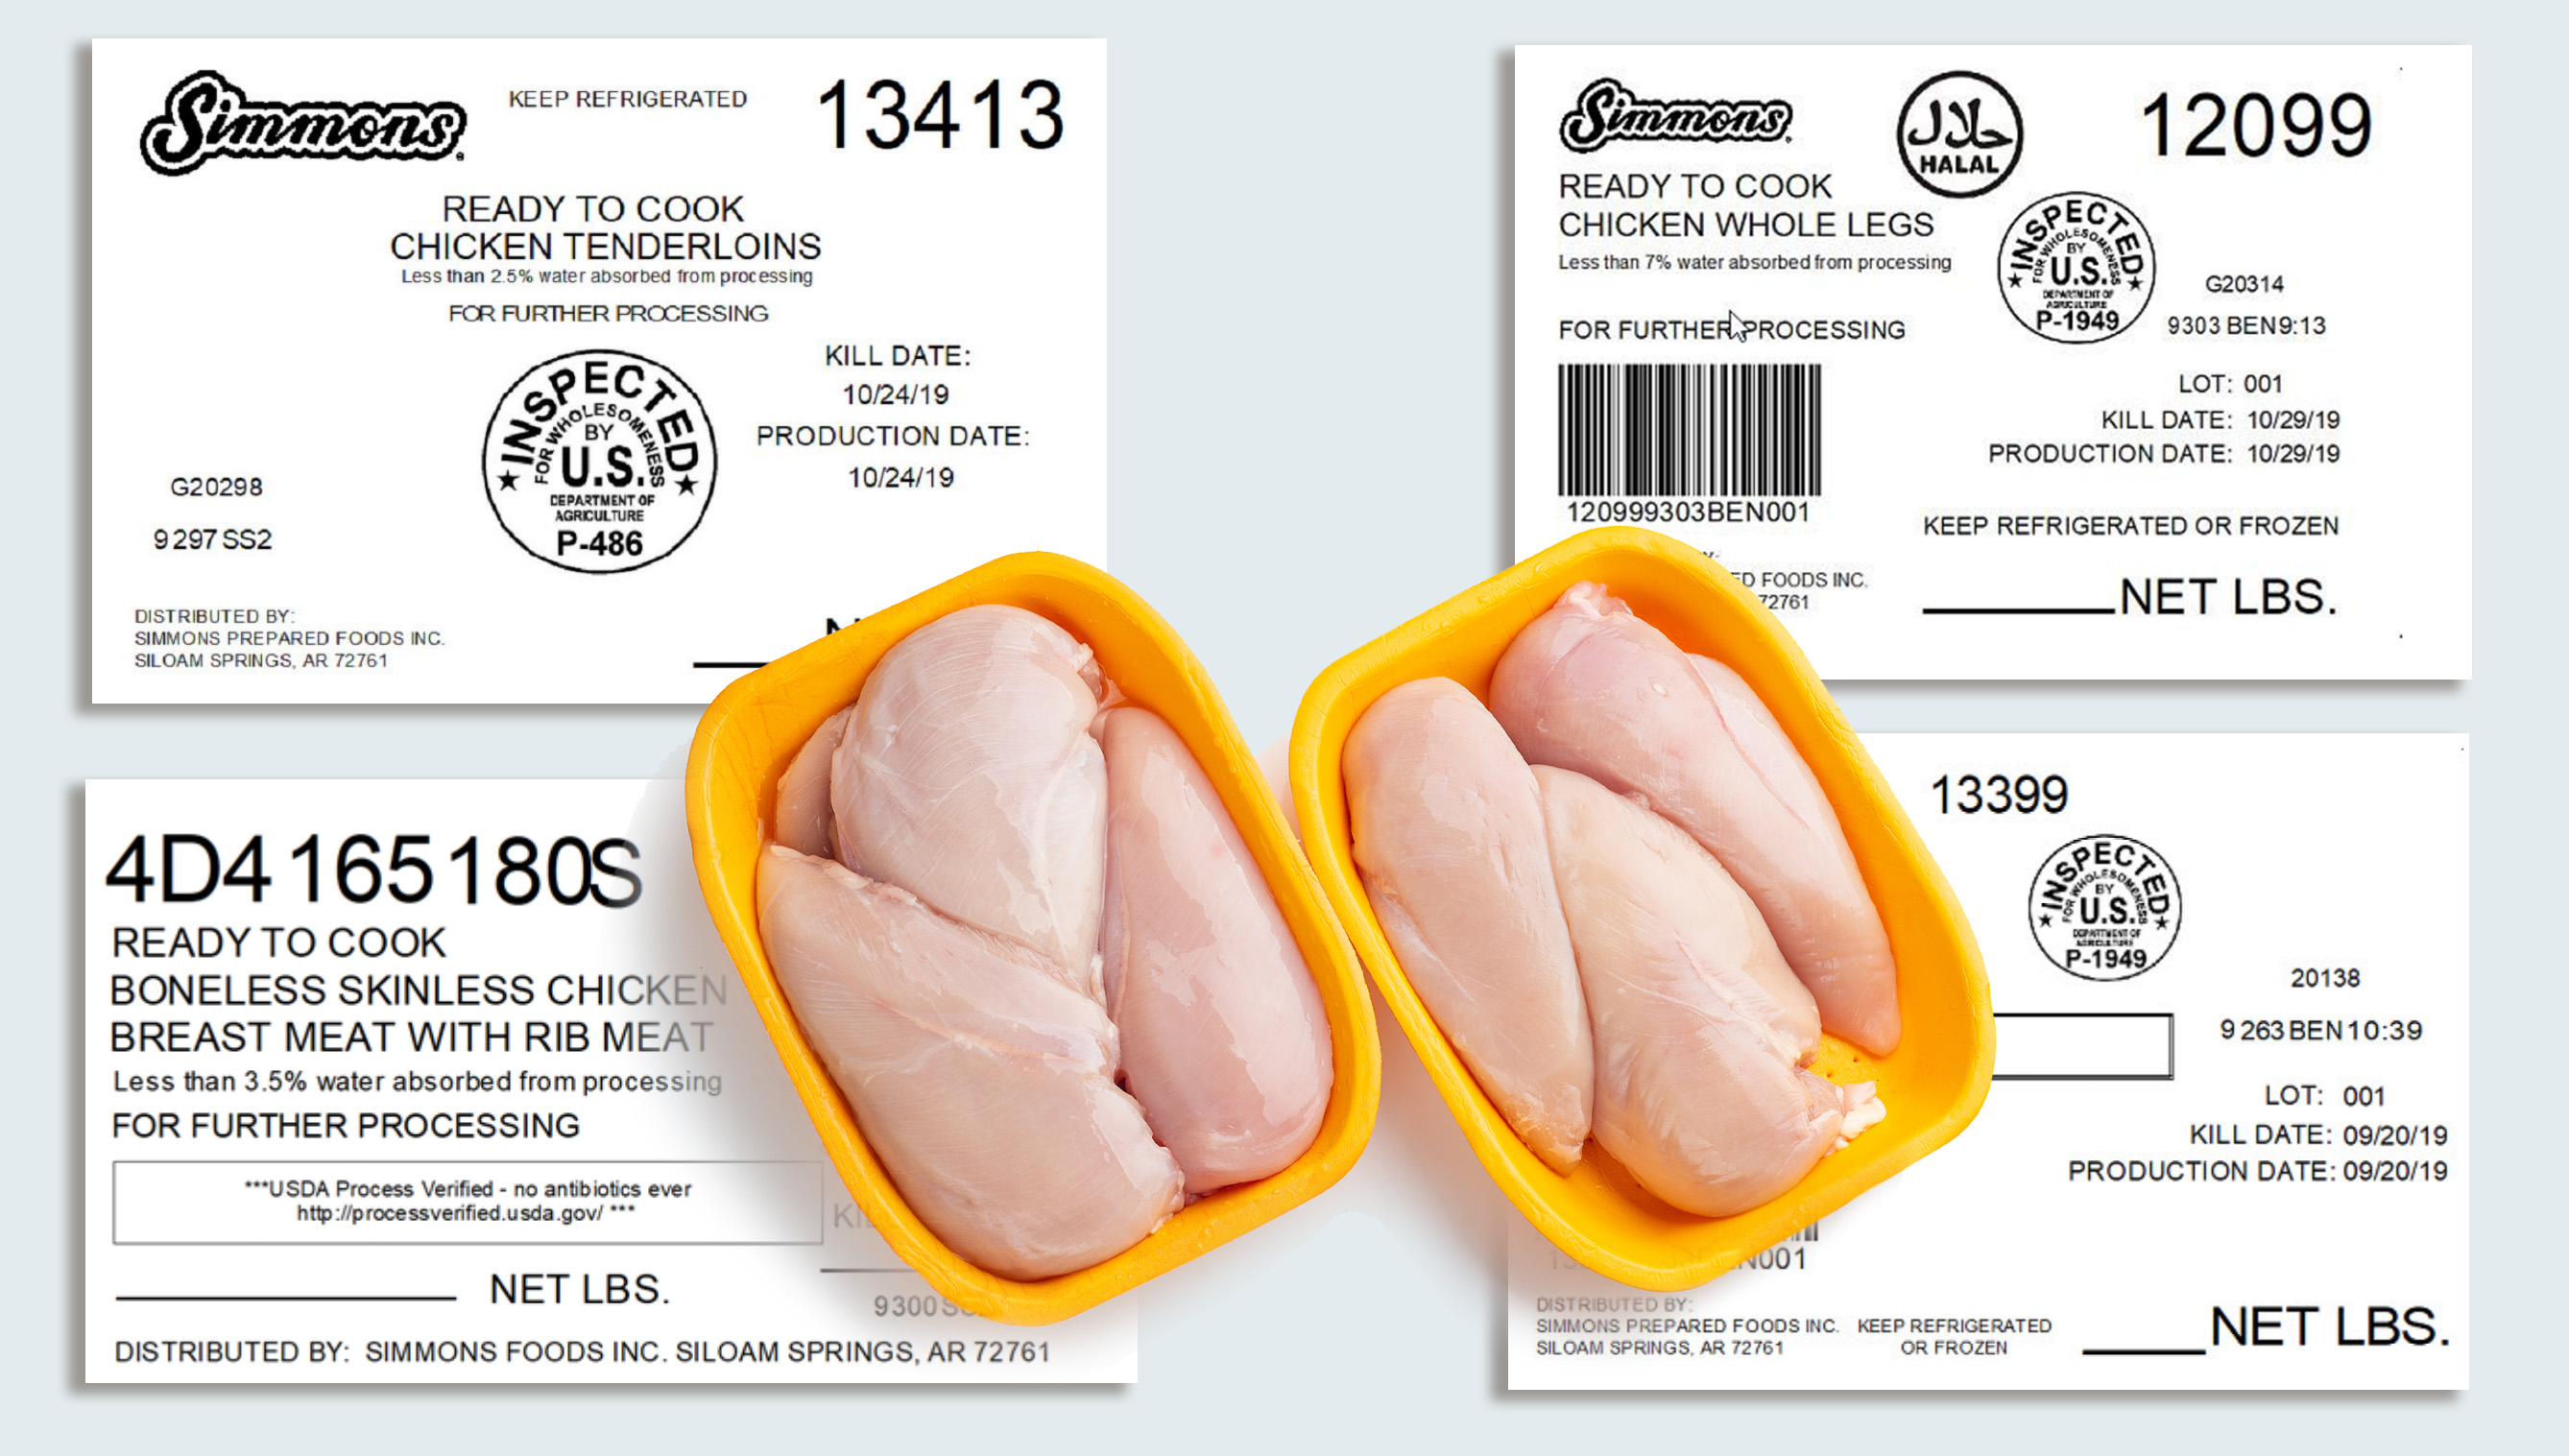 Highrisk recall of chicken products by Simmons Prepared Foods